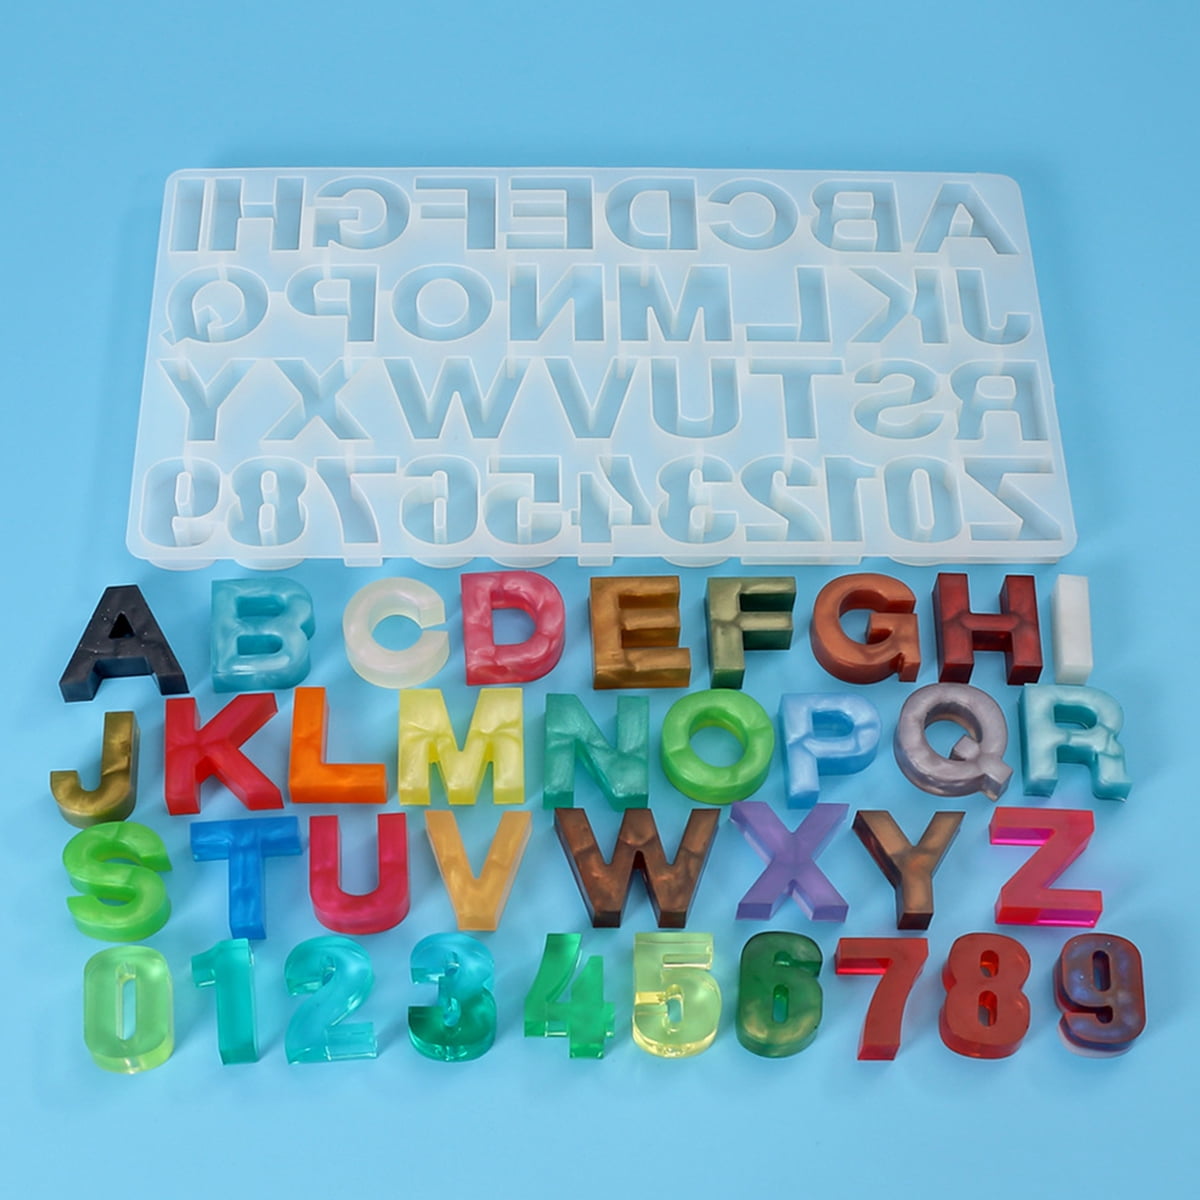 26pc Set of 4.5 Silicone Letter Molds Letter Moulds for Cake, Wax, Resin,  Concrete Craft Use Shiny Interior Alphabet A to Z Make Words 